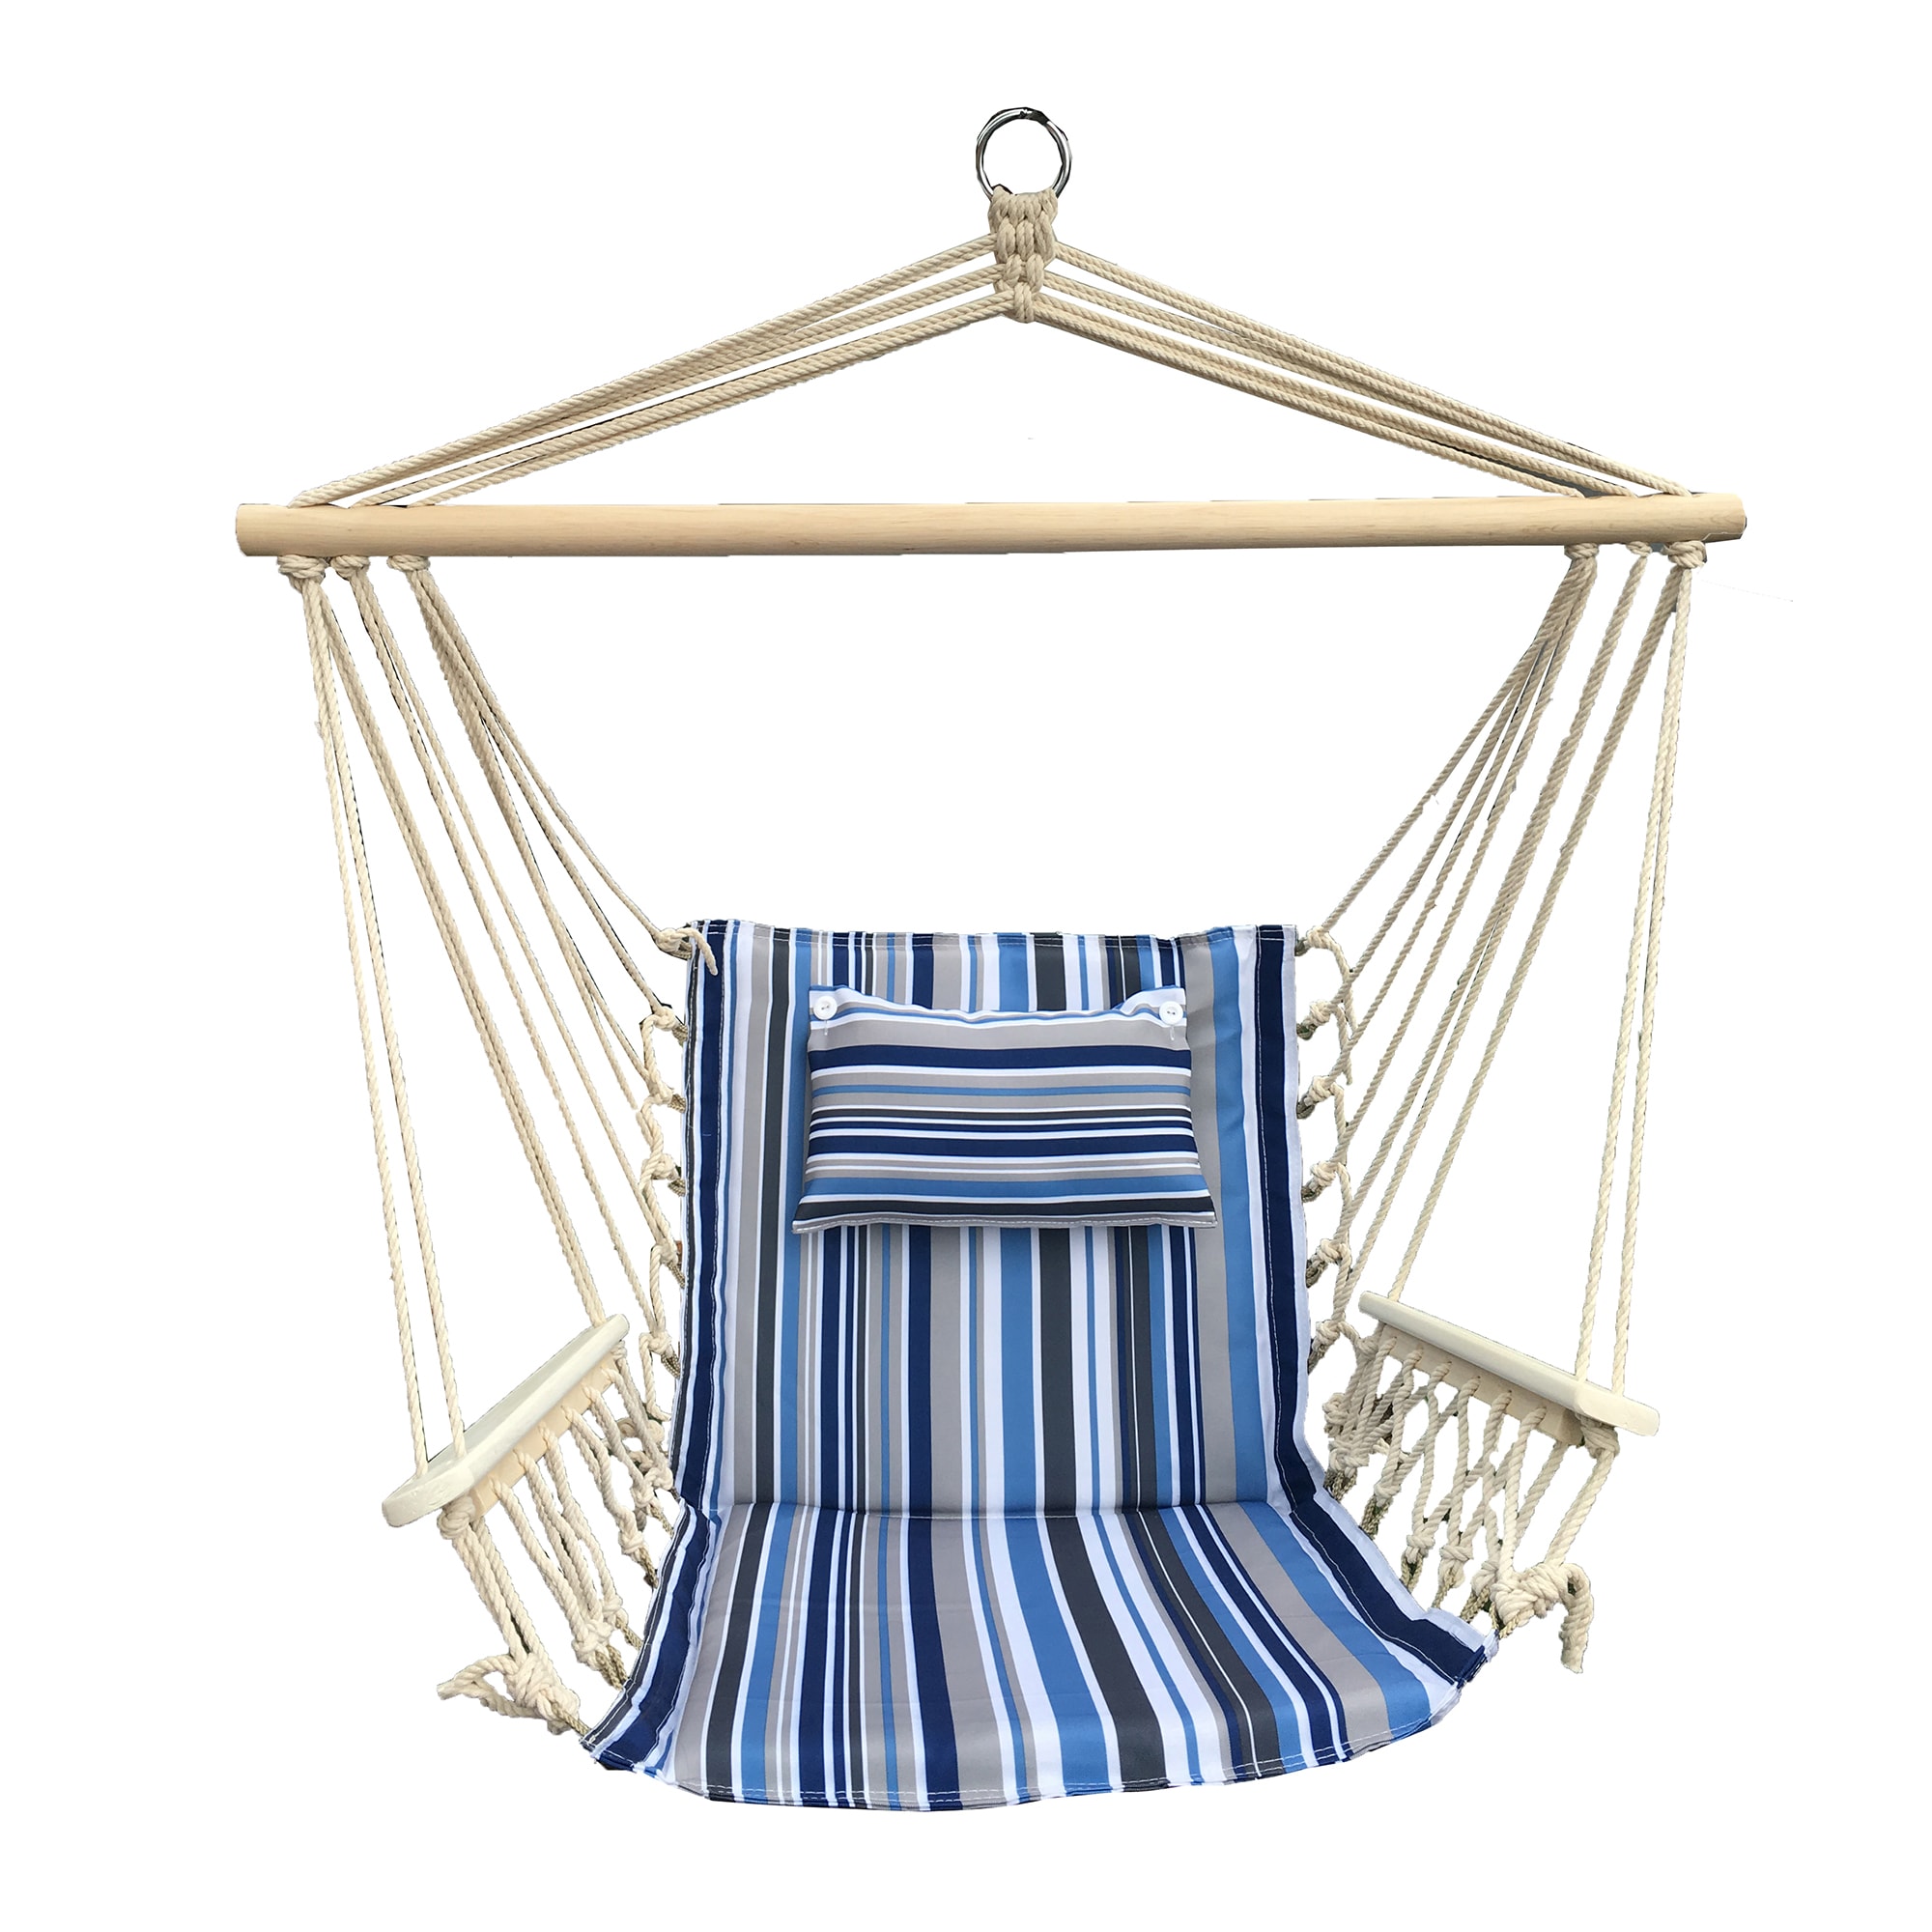 BACKYARD EXPRESSIONS PATIO · HOME · GARDEN 914978-NM Hammock Chair Hanging Rope Swing Quality Comfortable and Breathable Fabric-Indoor/Outdoor-Aqua 12 Patterns 